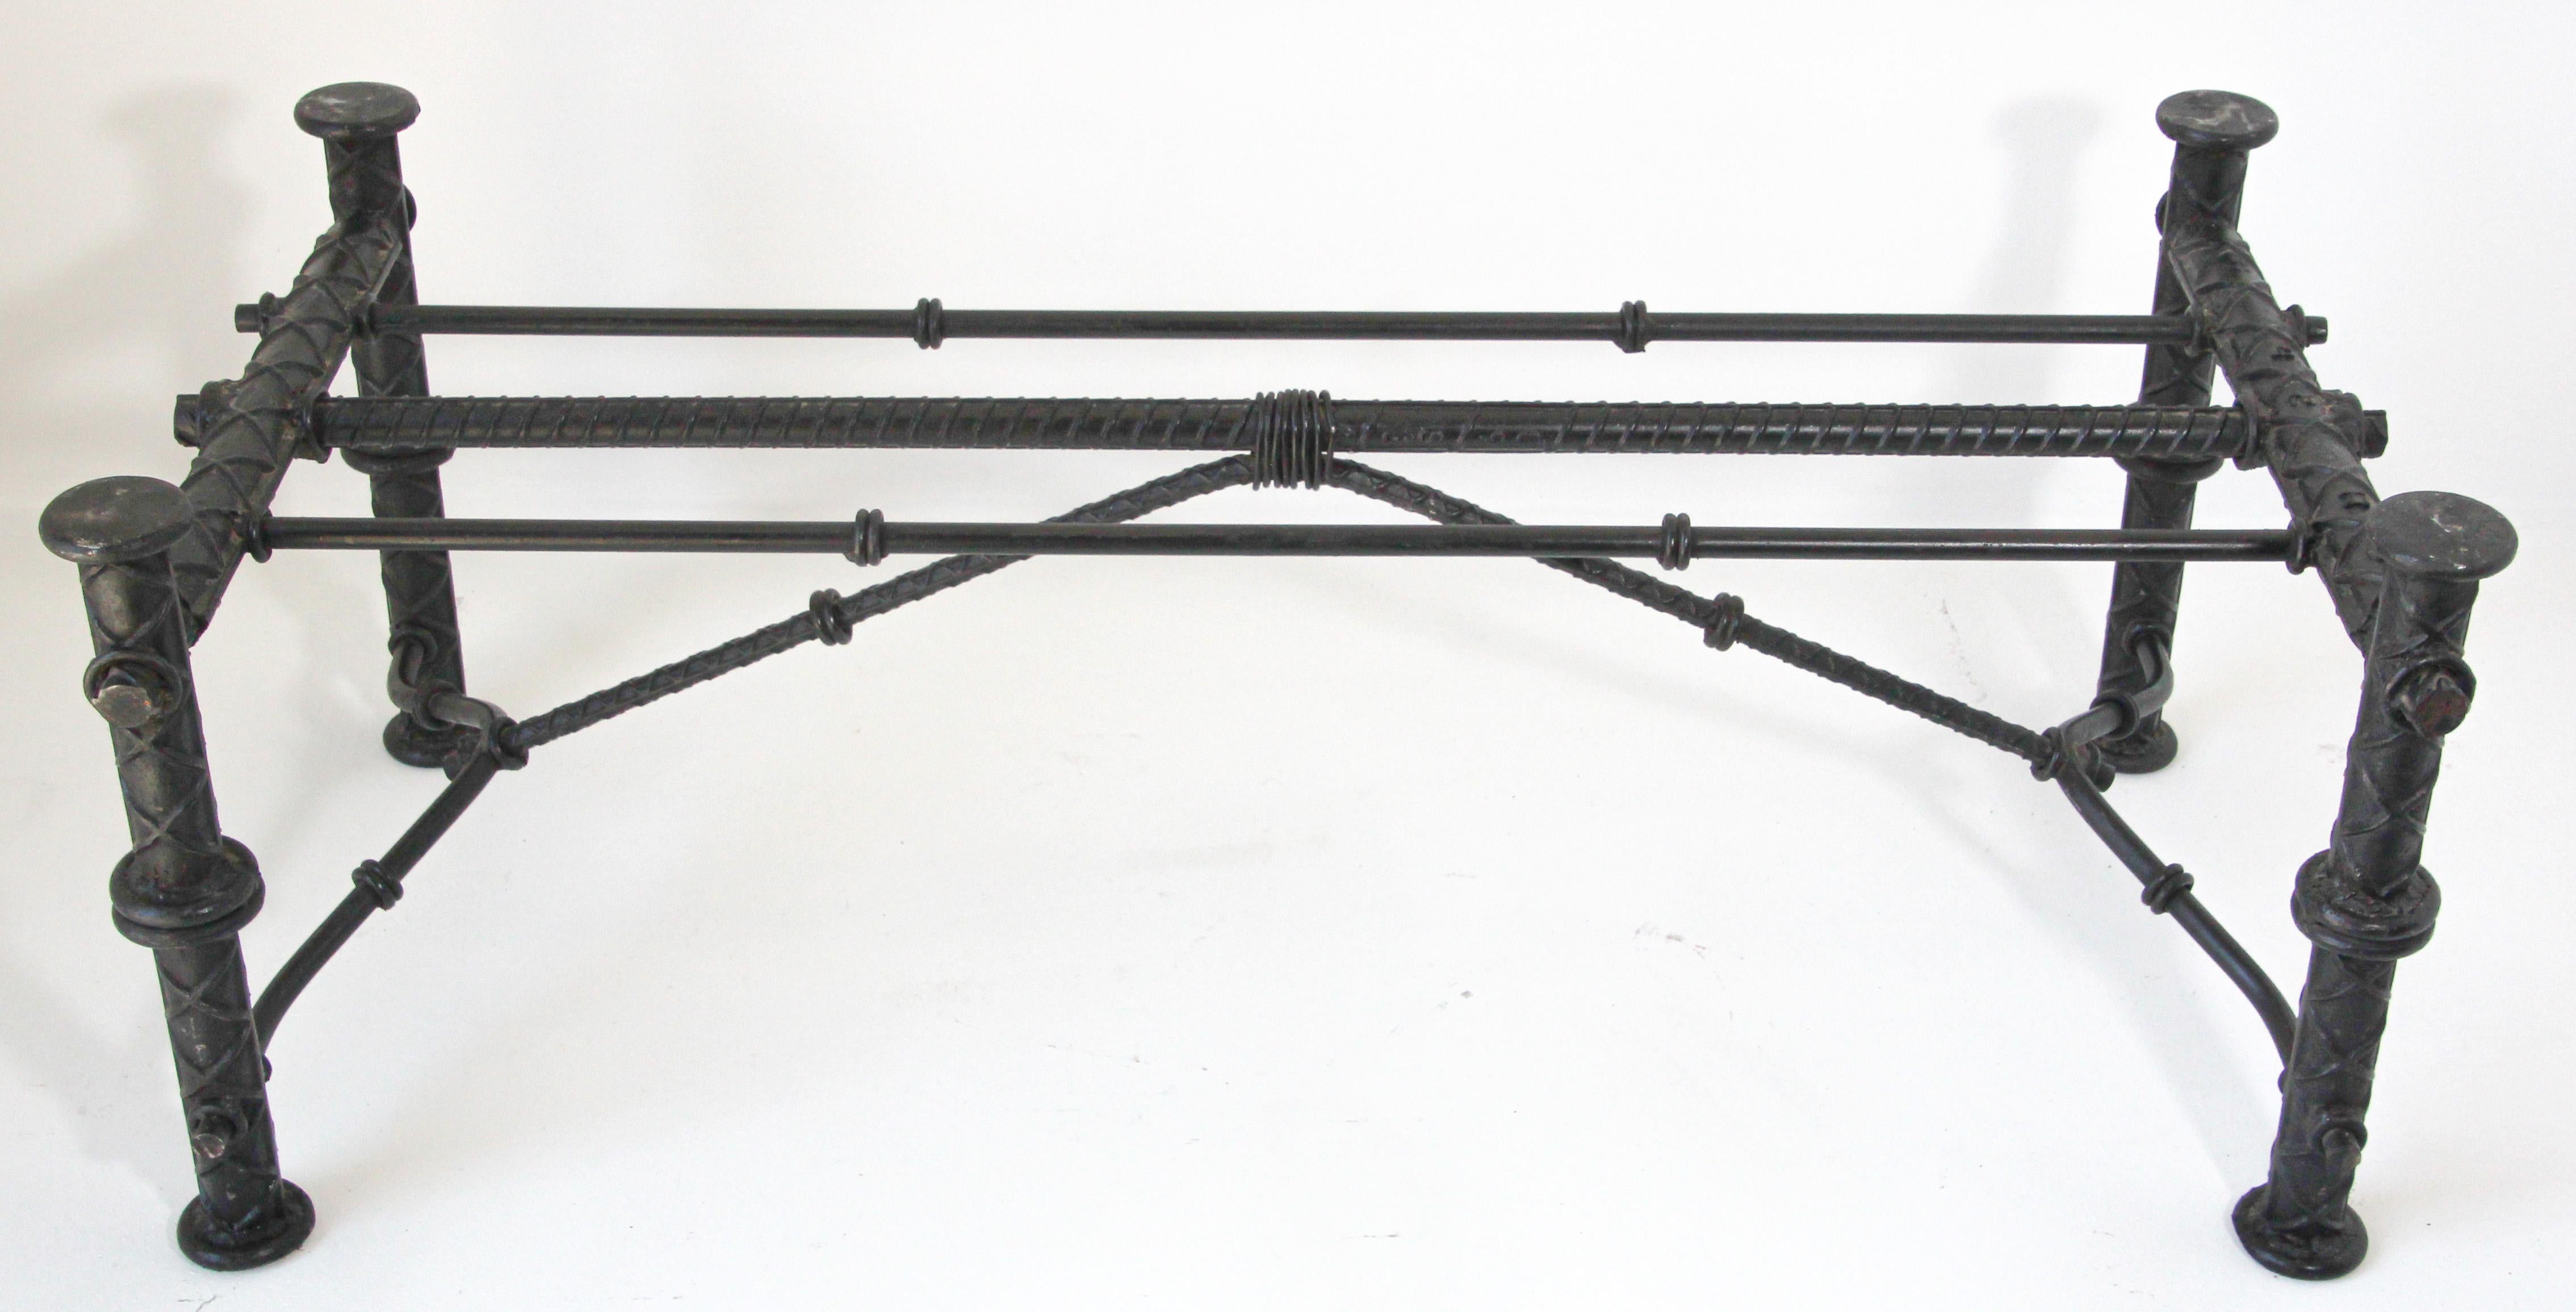 Impressive large Ilana Goor style Iron coffee table base with her typical rebar type construction.
Stunning Ilana Goor iron coffee table base with amazing sculptural Industrial Brutalist frame.
Numbered, no signature.
Base only, no glass top.
  